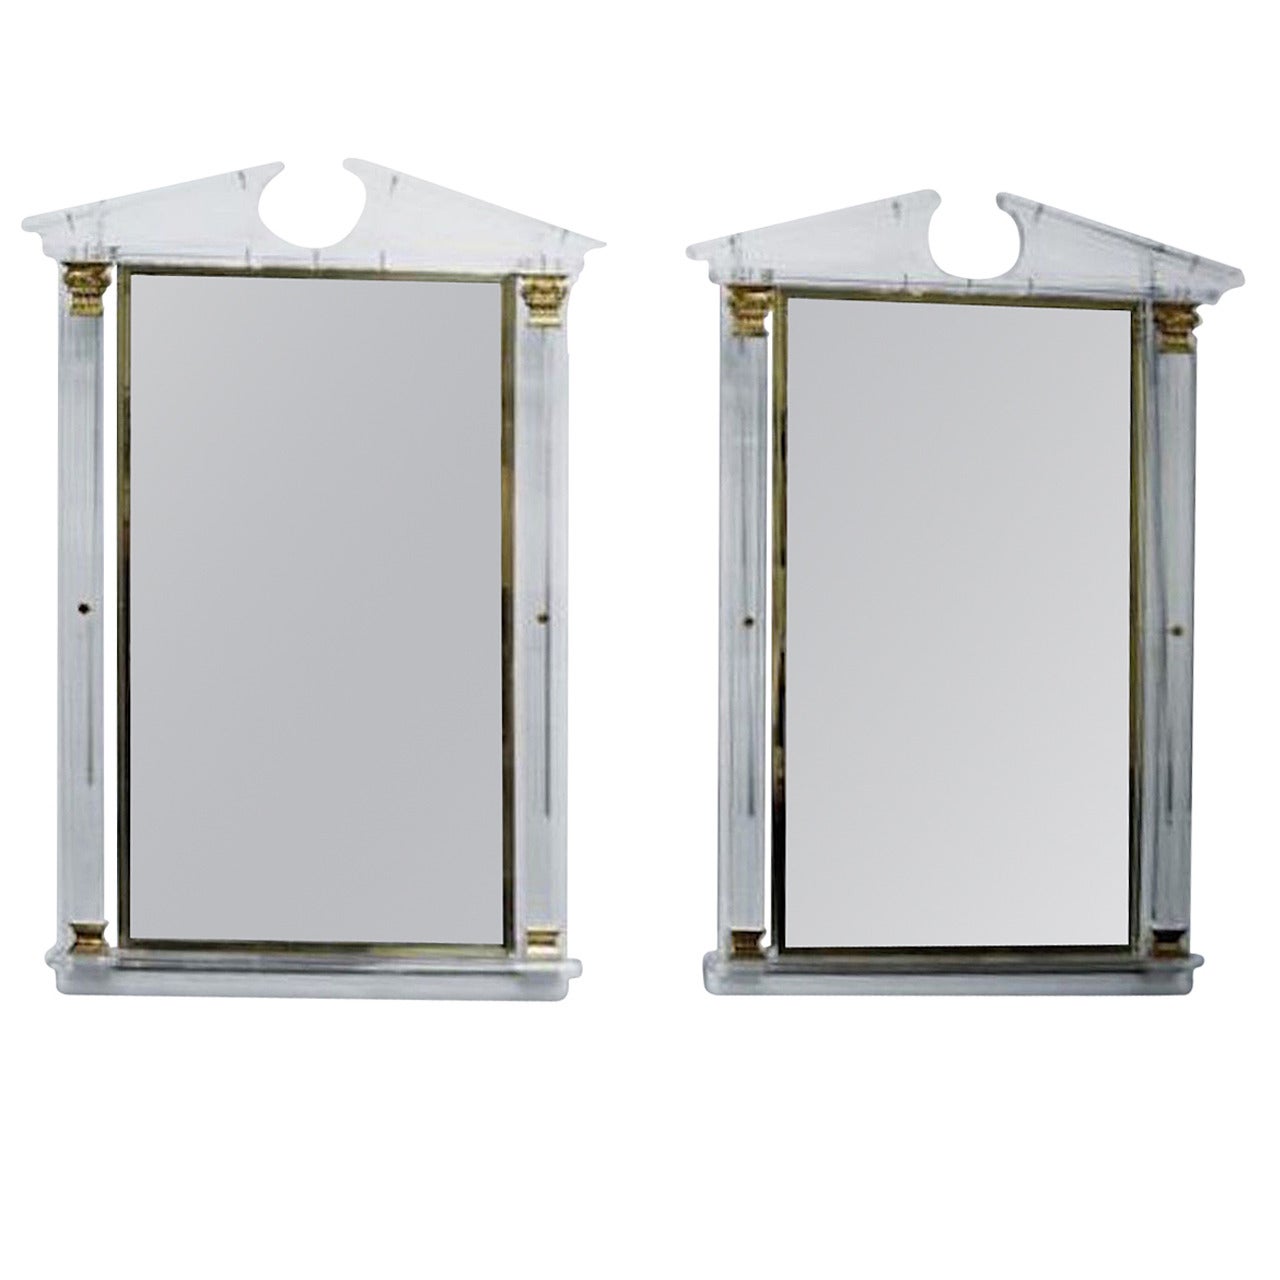 Superb Pair of Lucite and Gilt Mirrors, circa 1970 For Sale